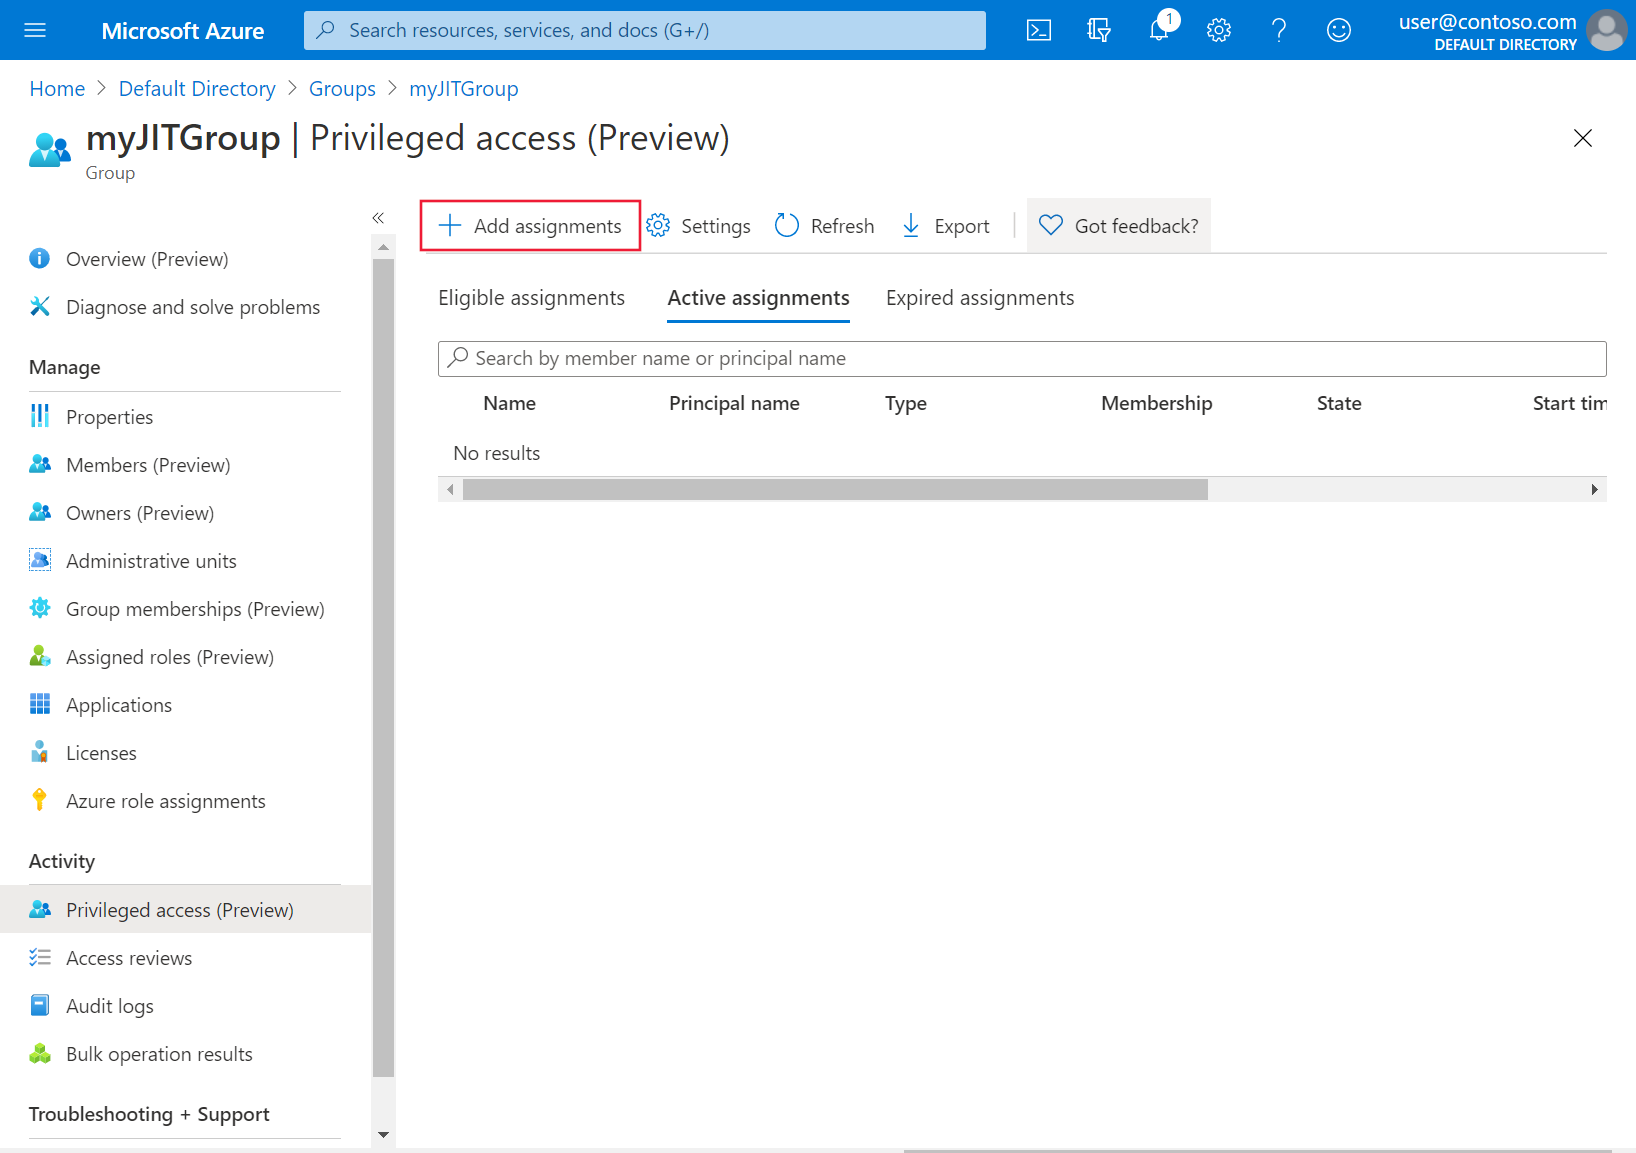 Screenshot of the Privileged access (Preview) screen in the Azure portal after enabling. The option to Add assignments is highlighted.